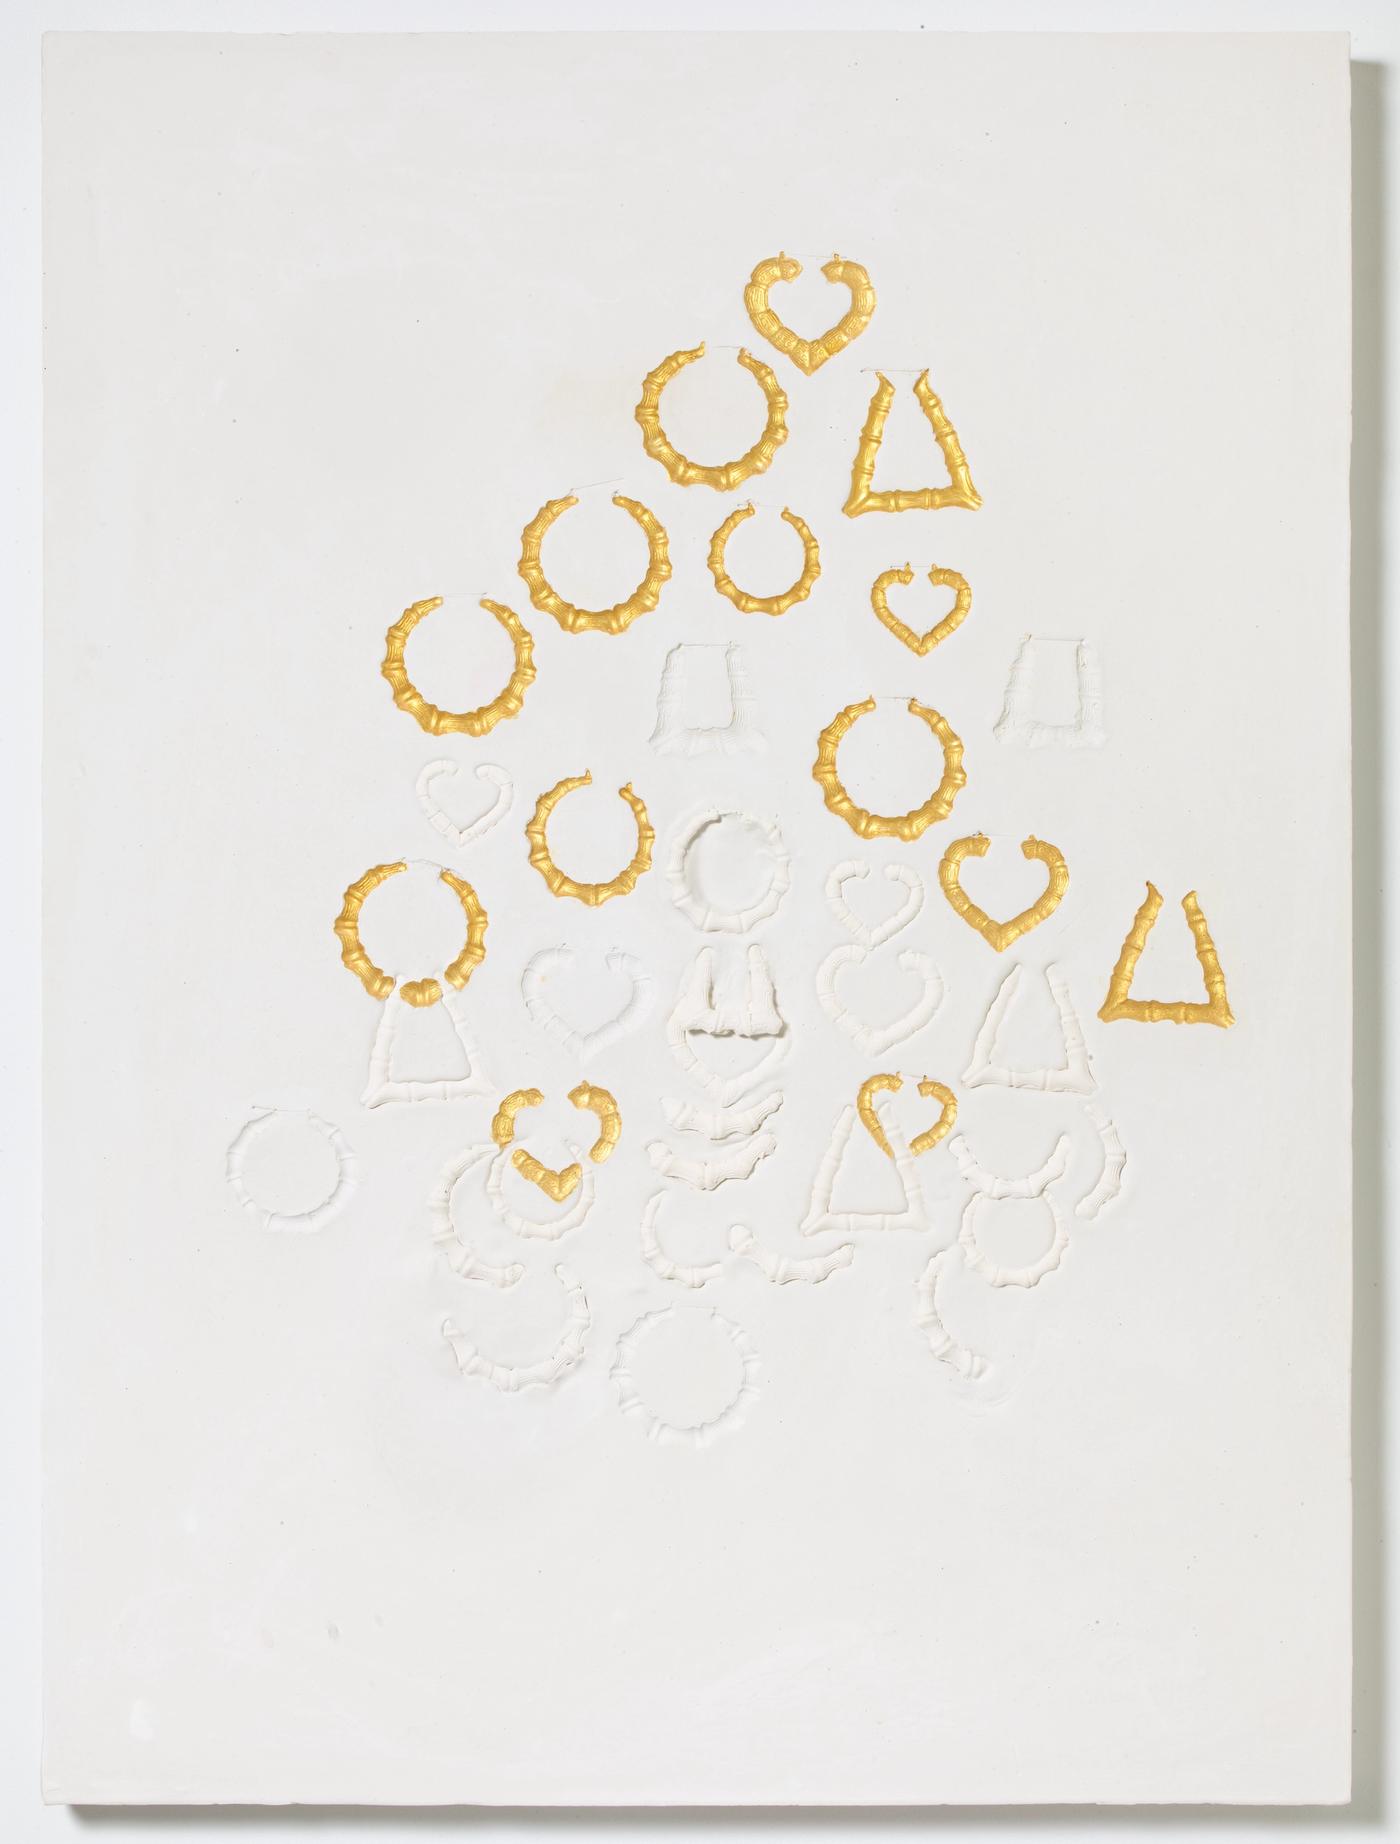 Image of Still Life with Doorknocker Earrings With Fourteen Gold, 2020: Plaster and acrylic